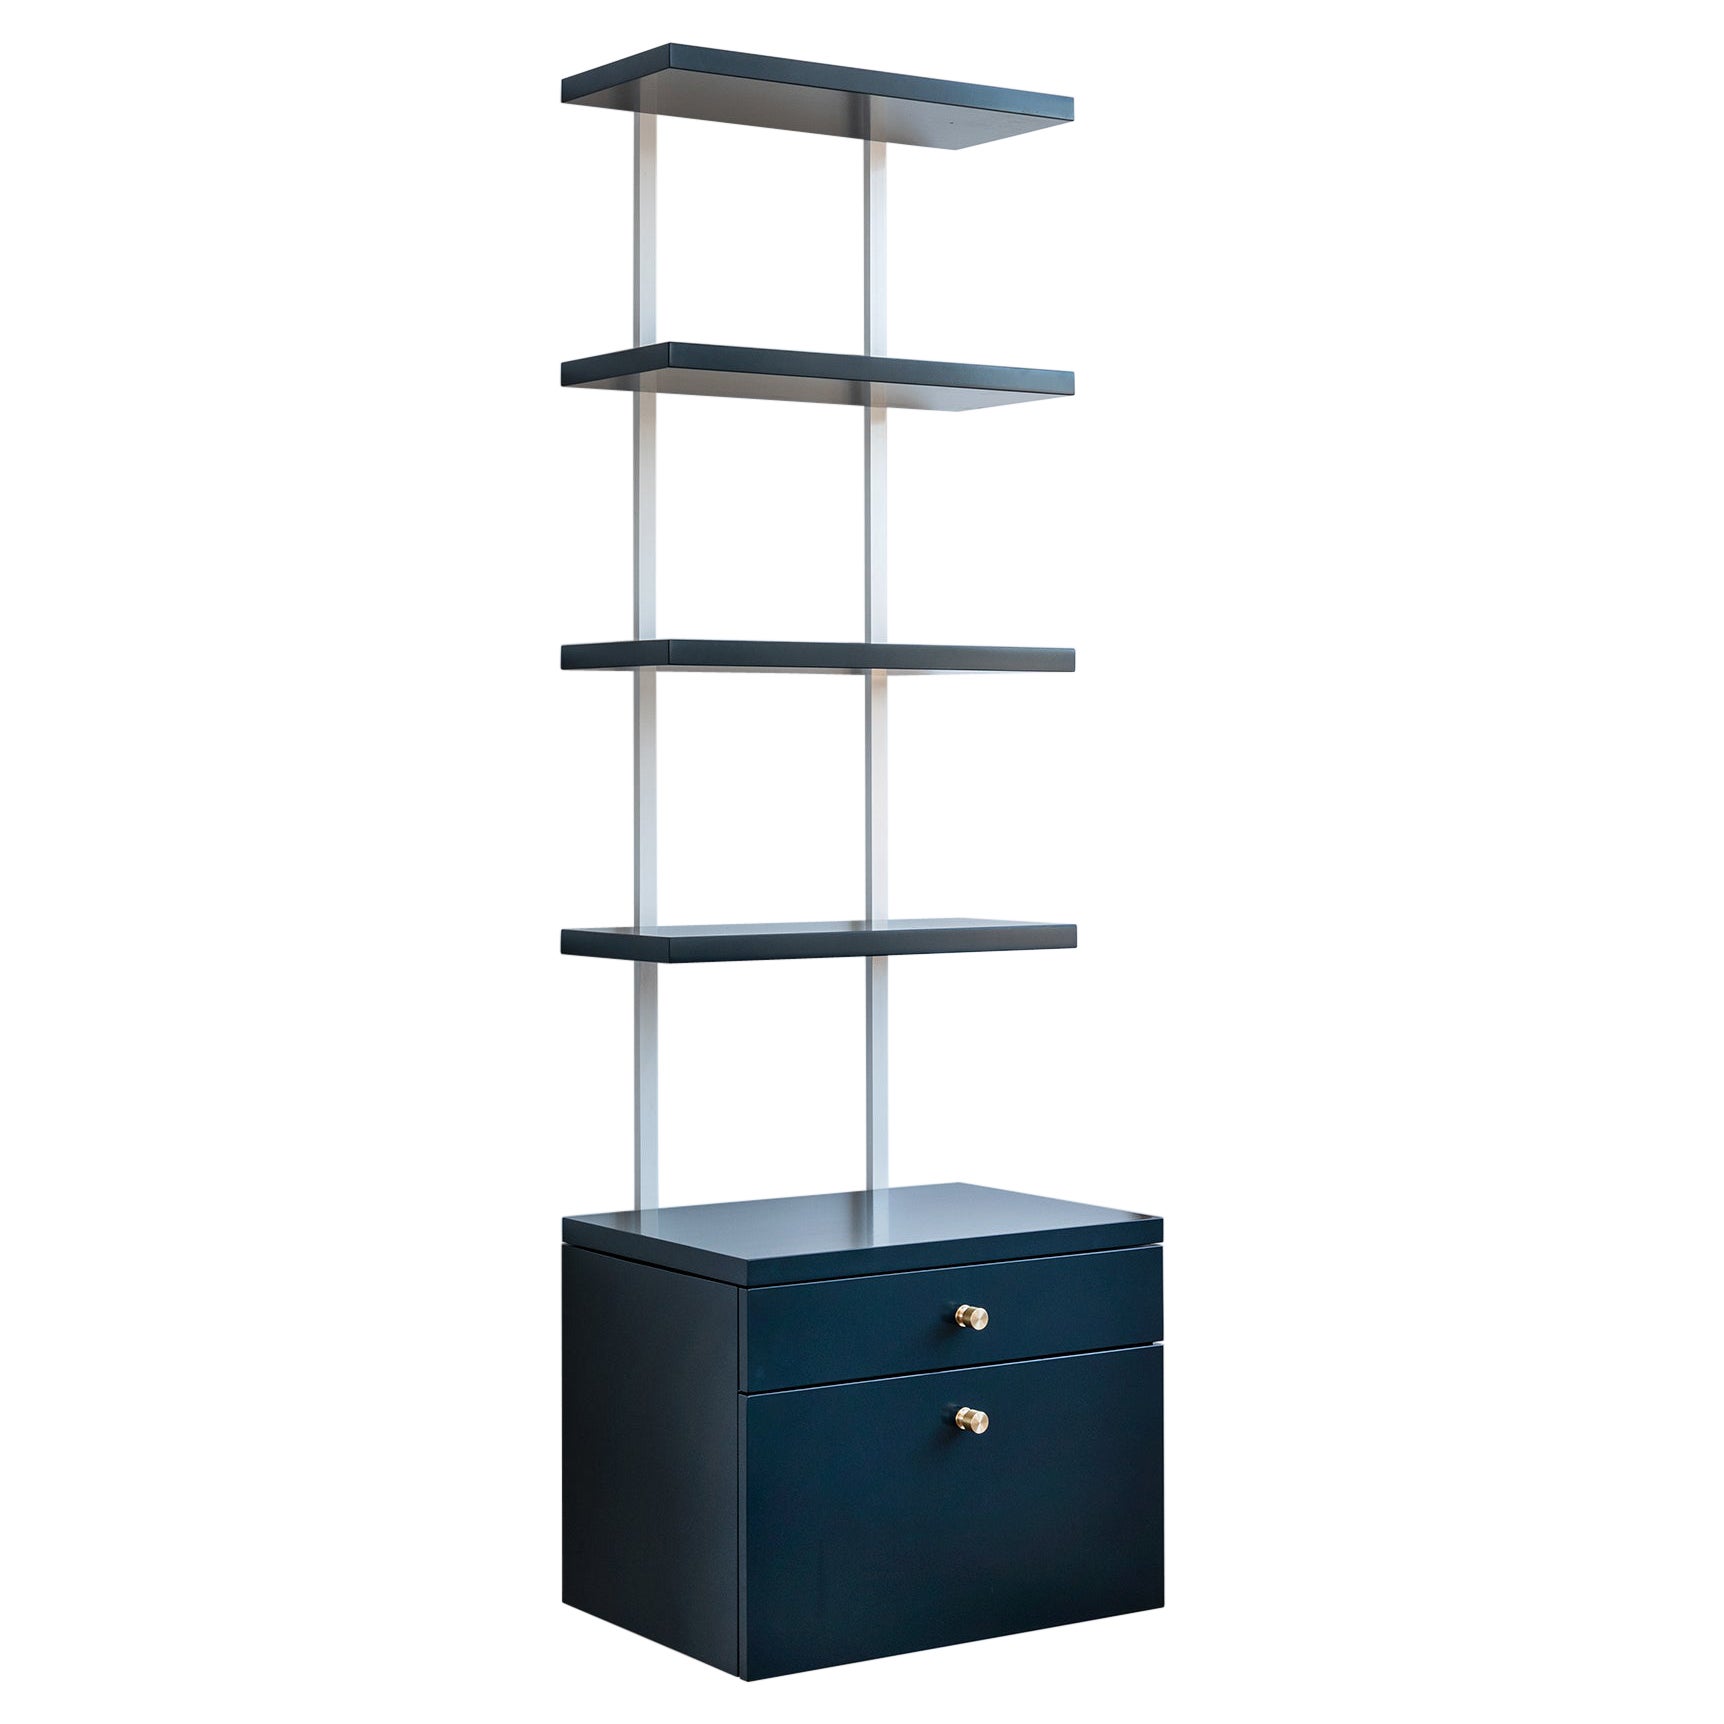 AS6 wall unit 24" wide shelves & drawer cabinet in Hague blue lacquer For Sale